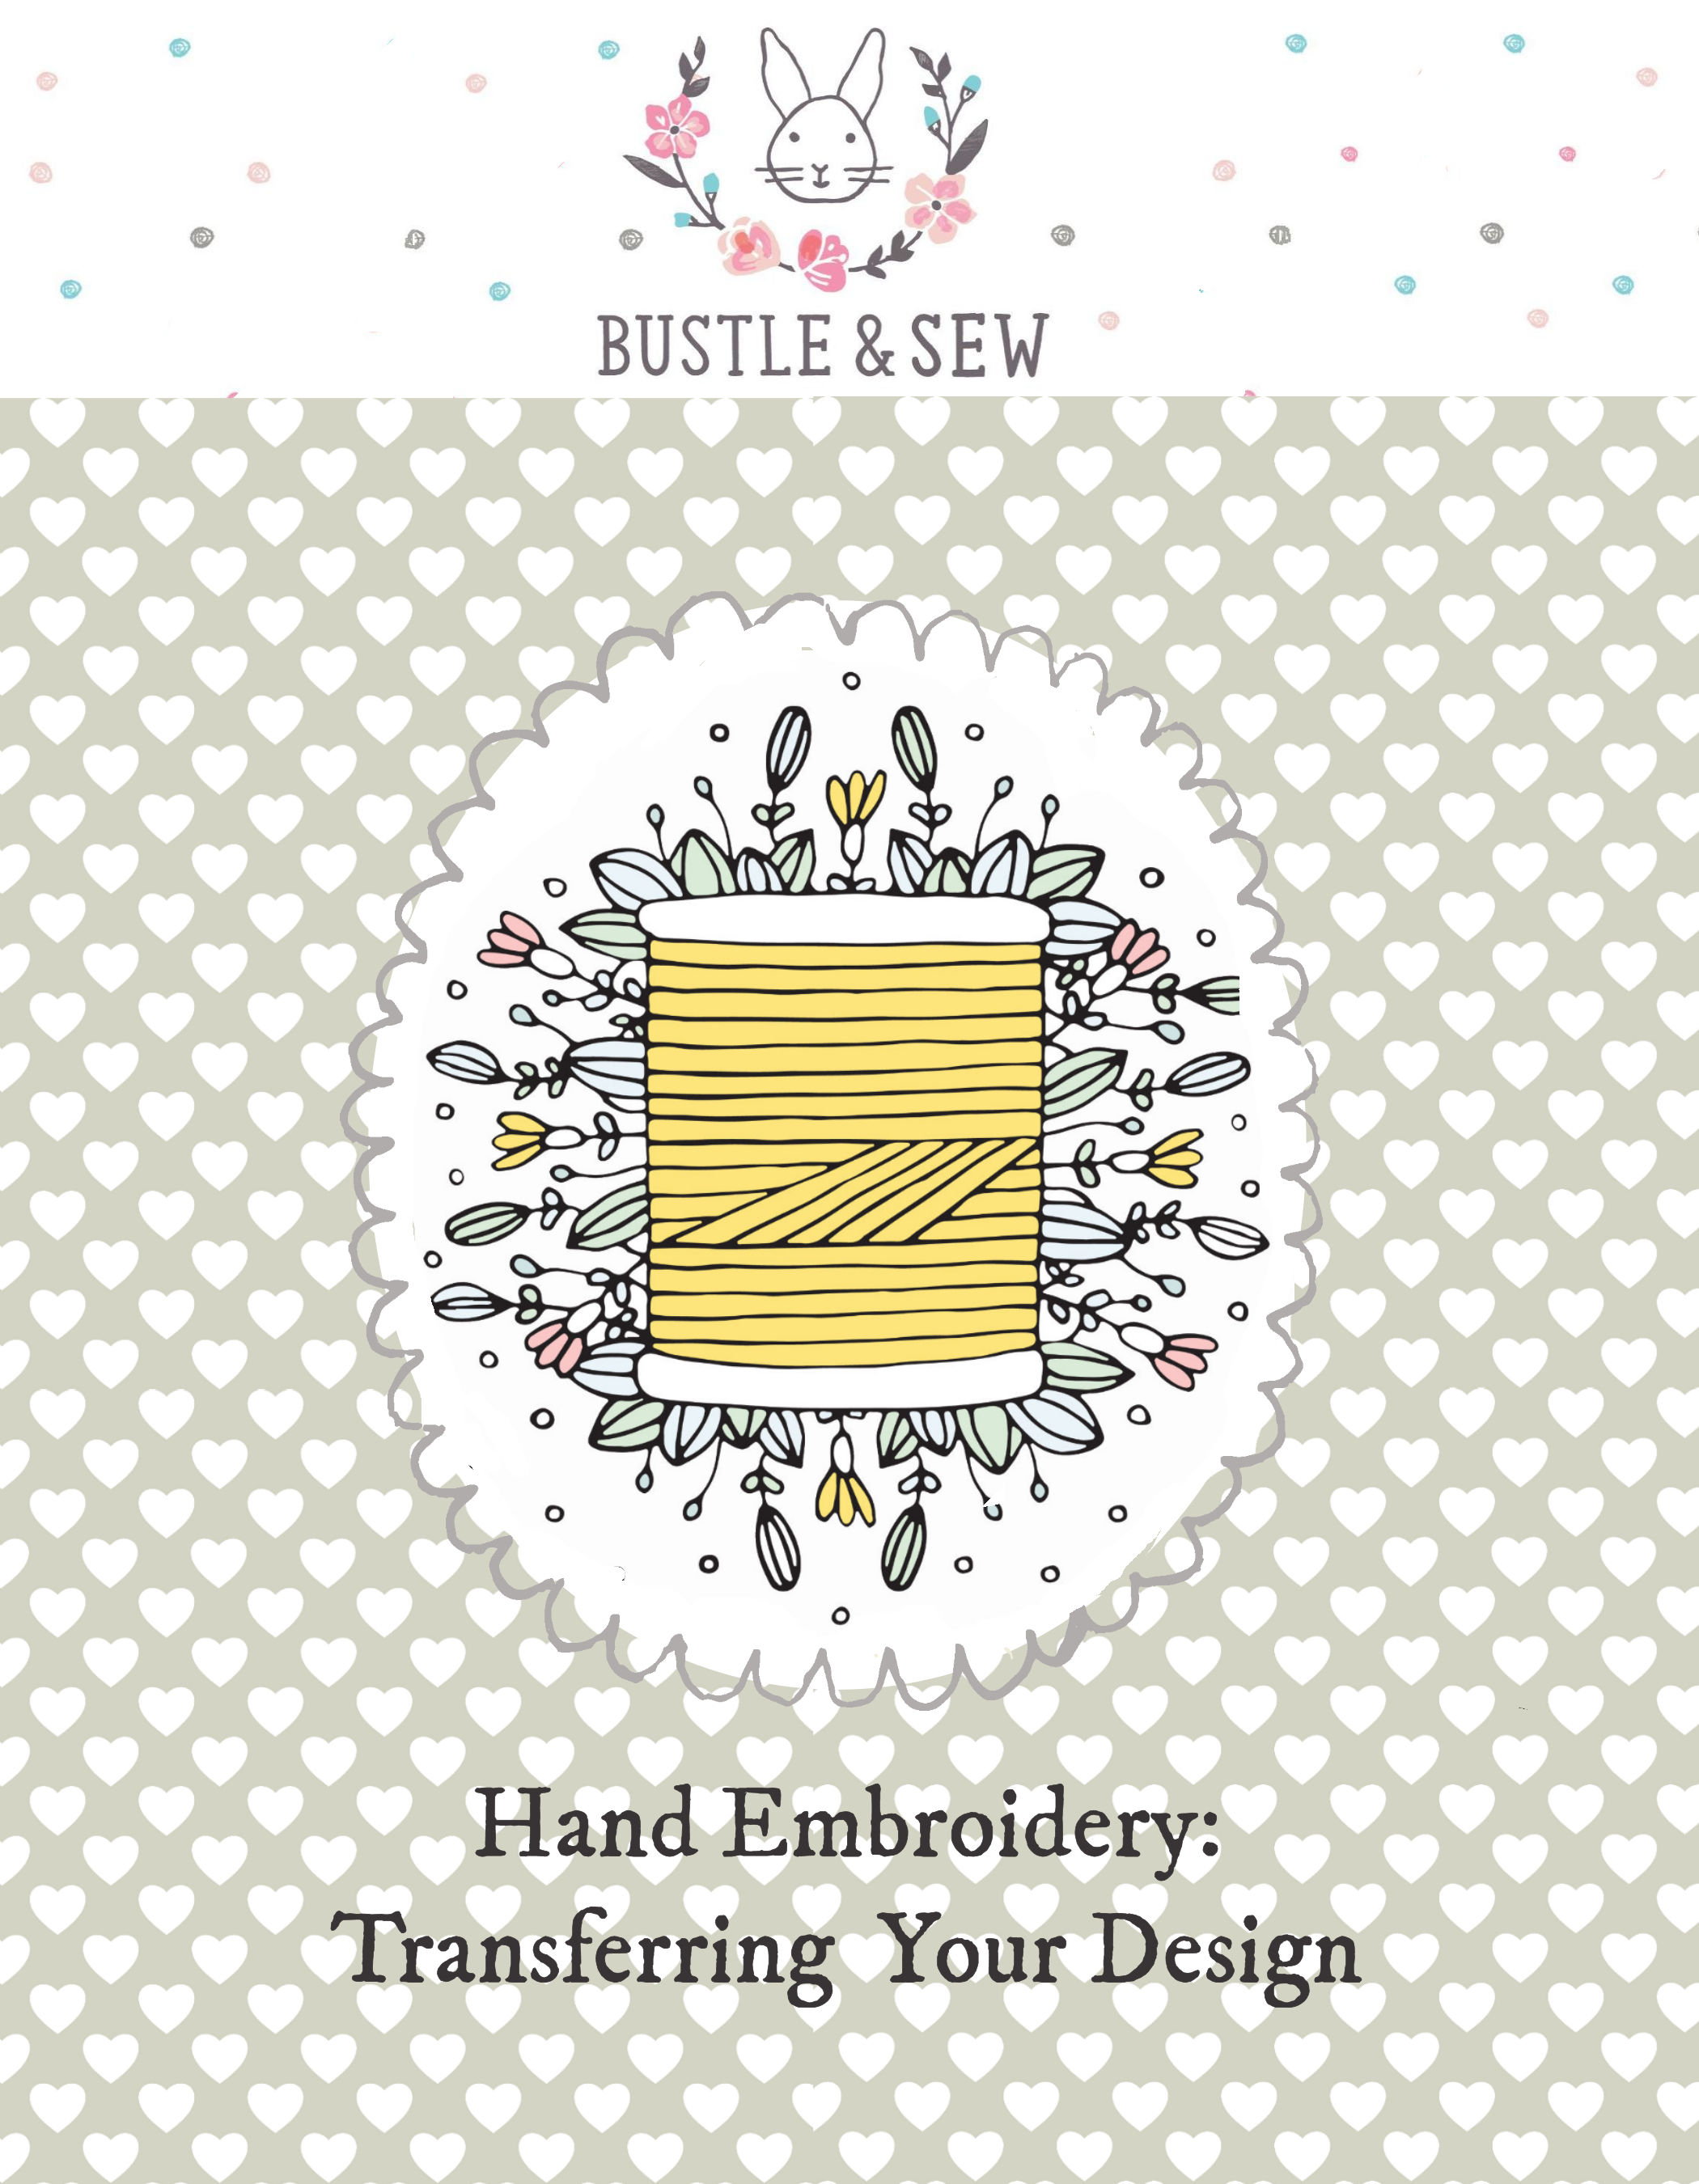 Embroidery On Paper Free Patterns Transfer Your Pattern The Easy Way Bustle Sew